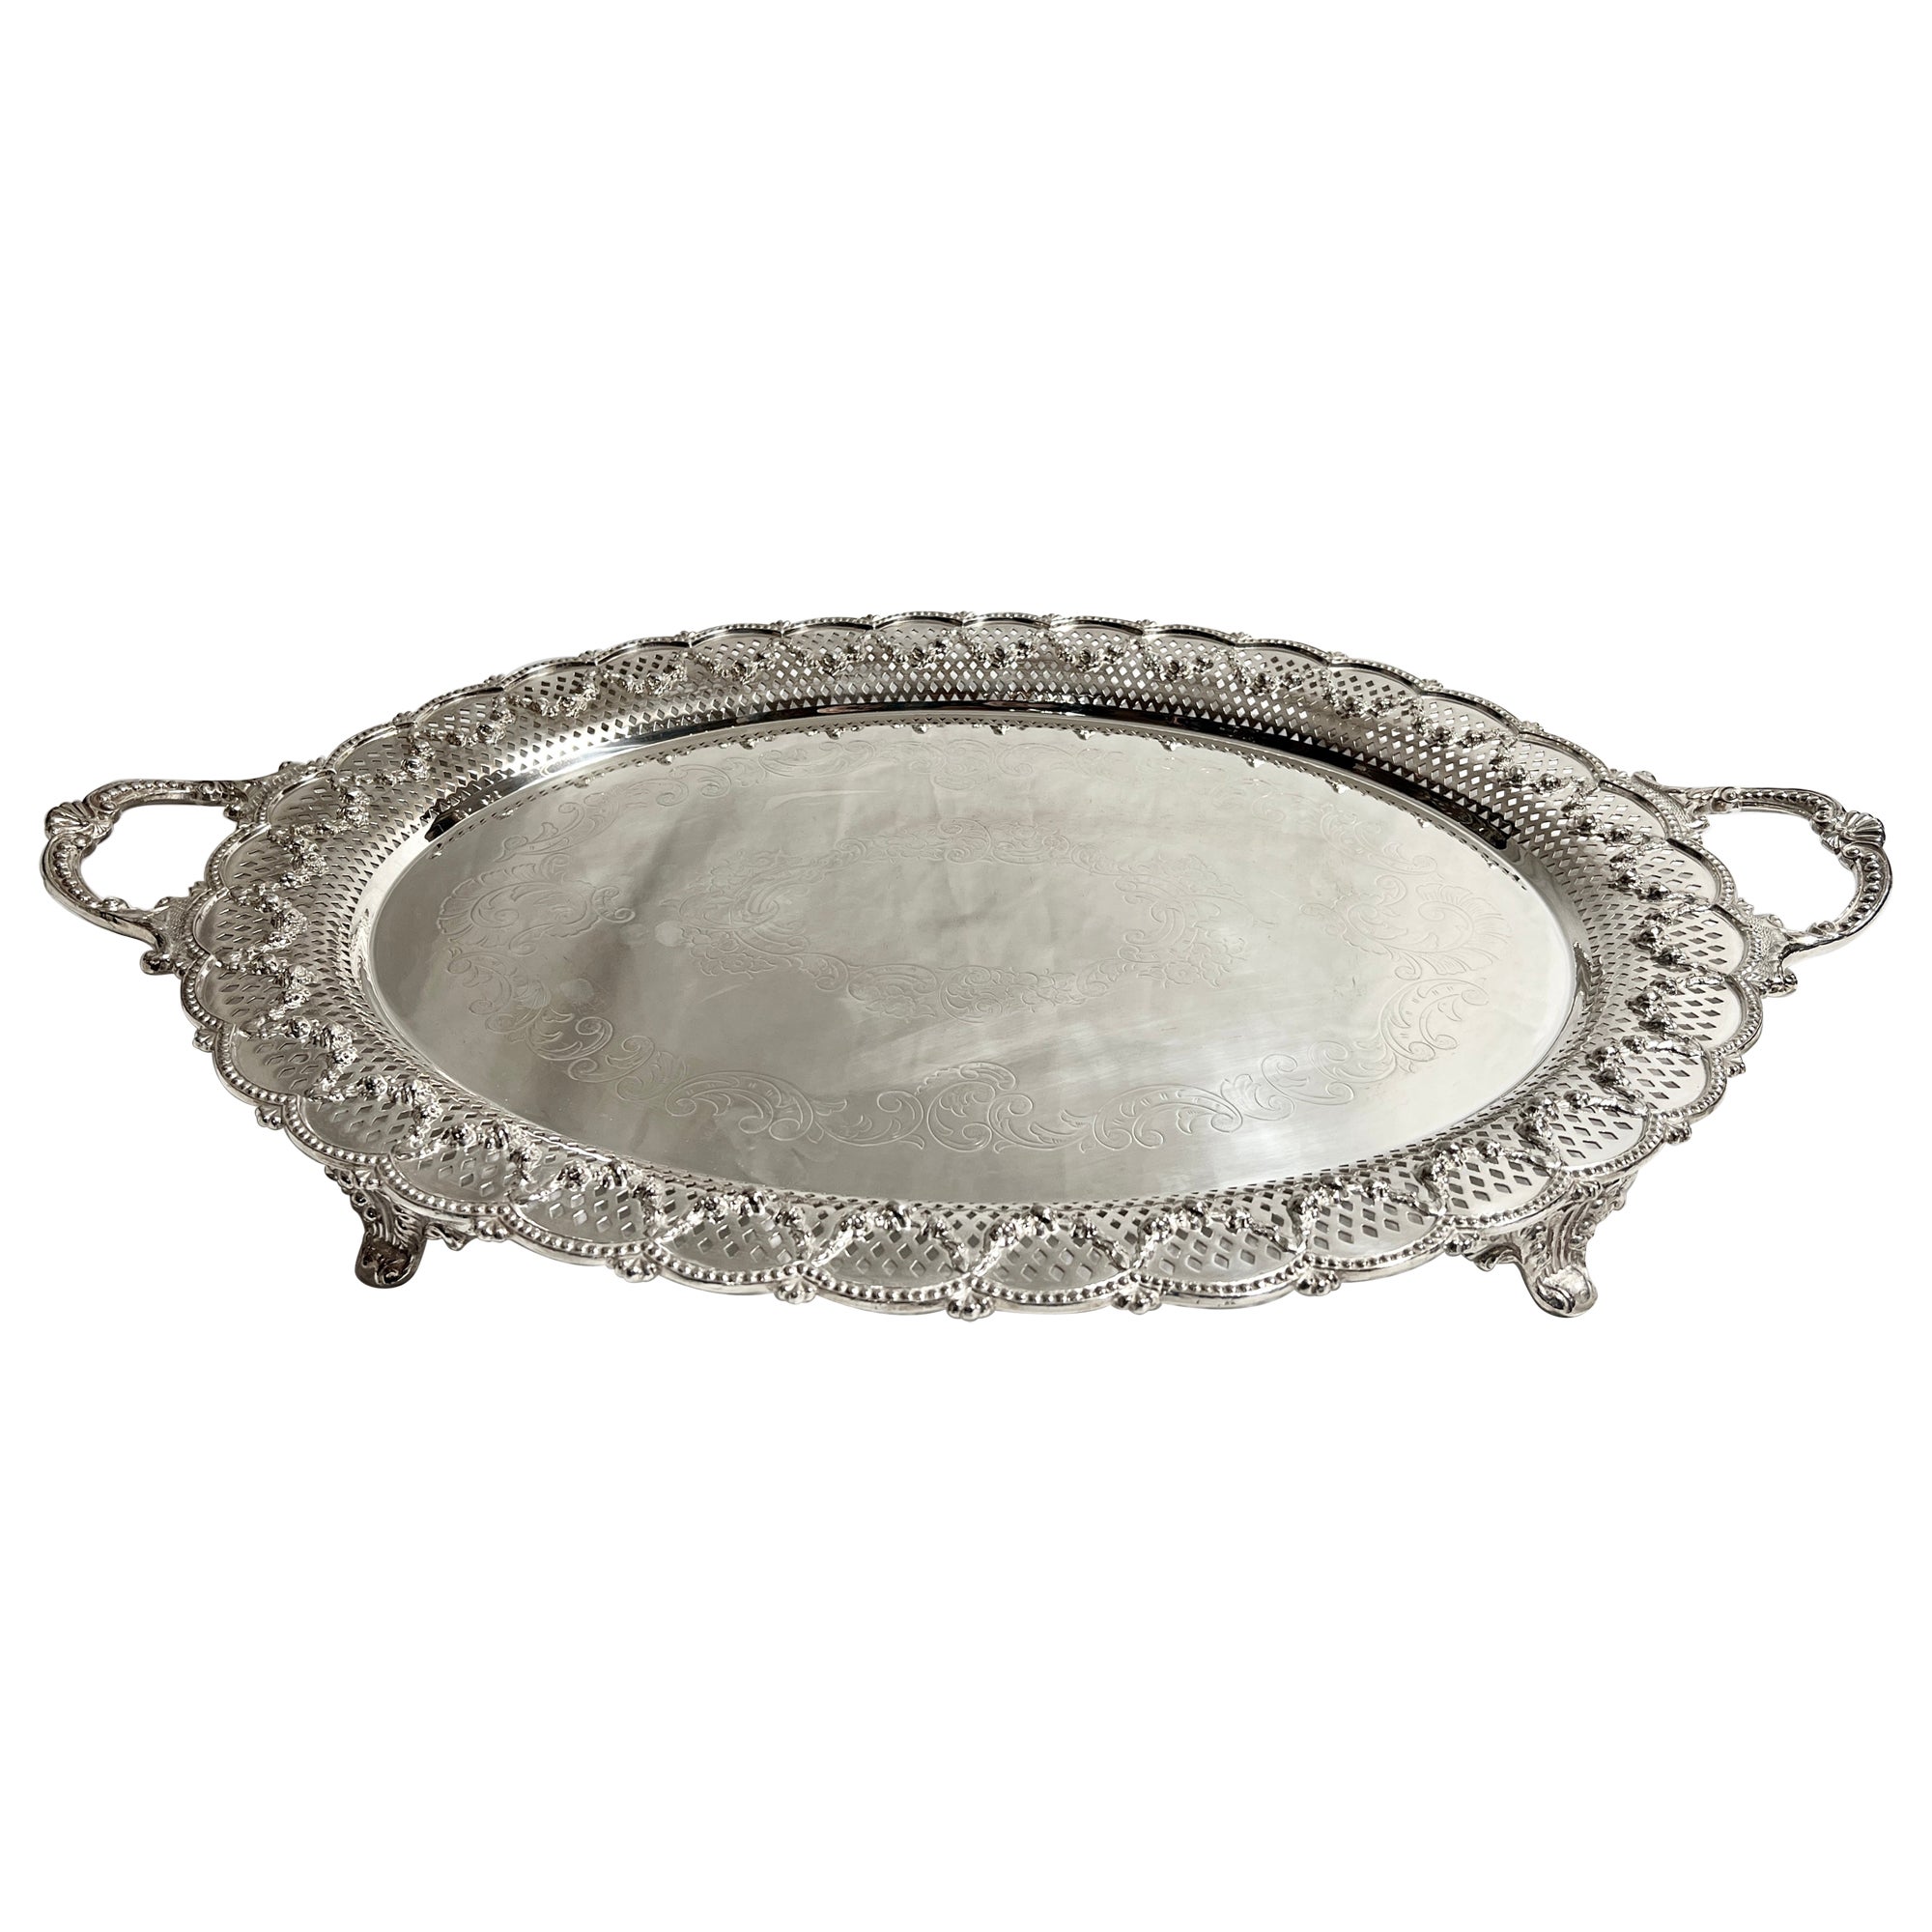 Antique English Sheffield Silver Footed Openwork Tray, Circa 1890.